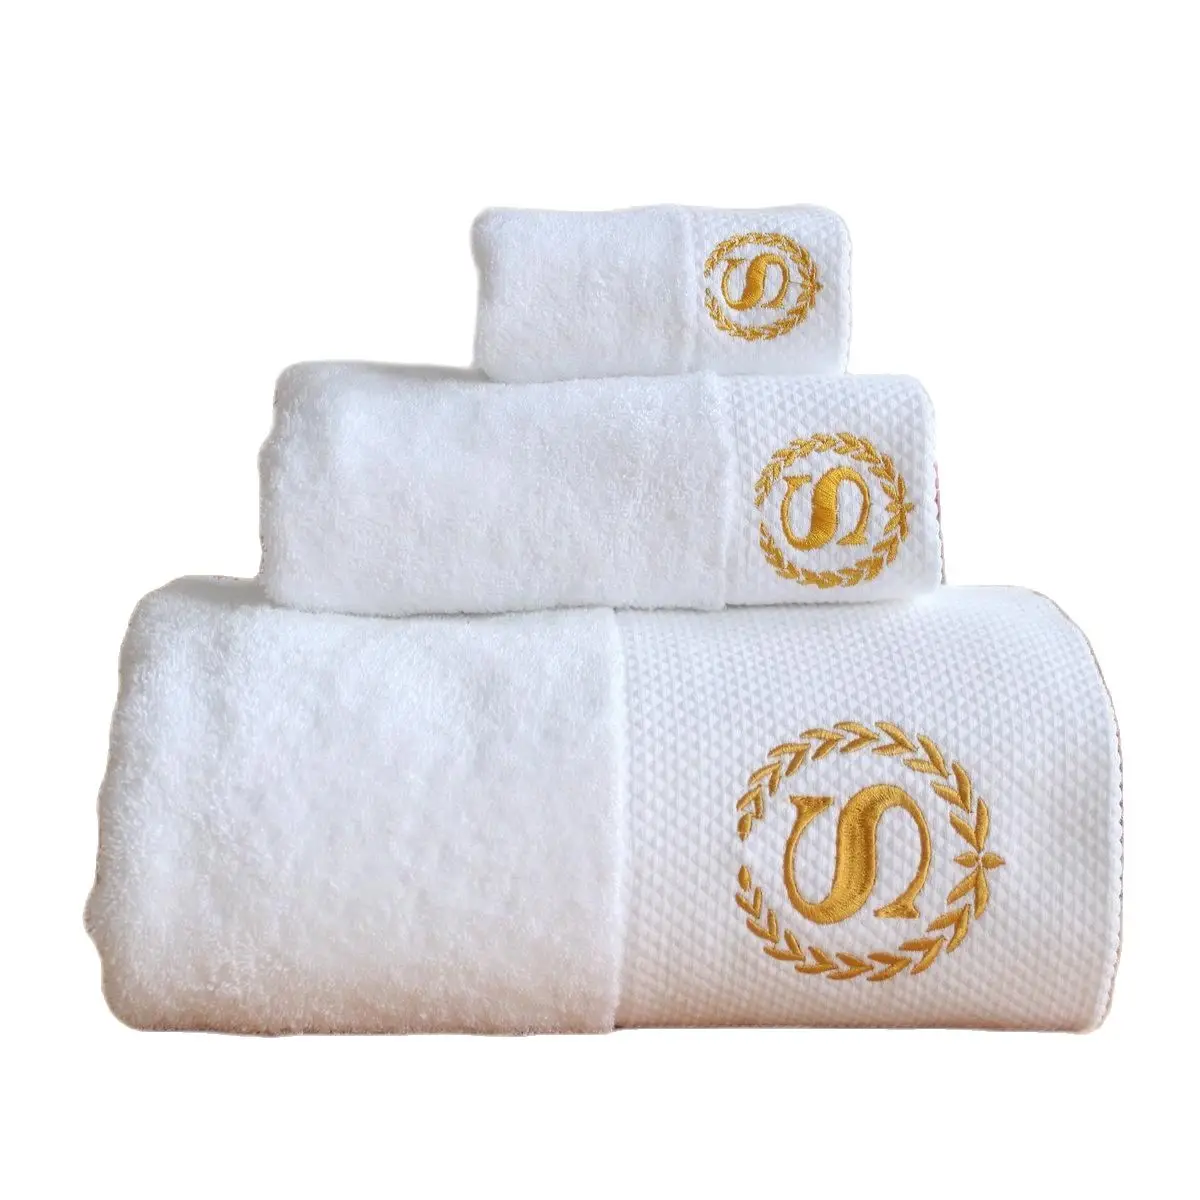 Extra Large 80x180cm White Cotton Hotel Towels For Sale With Embroidery And  Custom Logo Ideal For Hotel, Home, Hot Springs, Sauna, Spa, Beauty Salon  800g From Maidehao888, $17.11